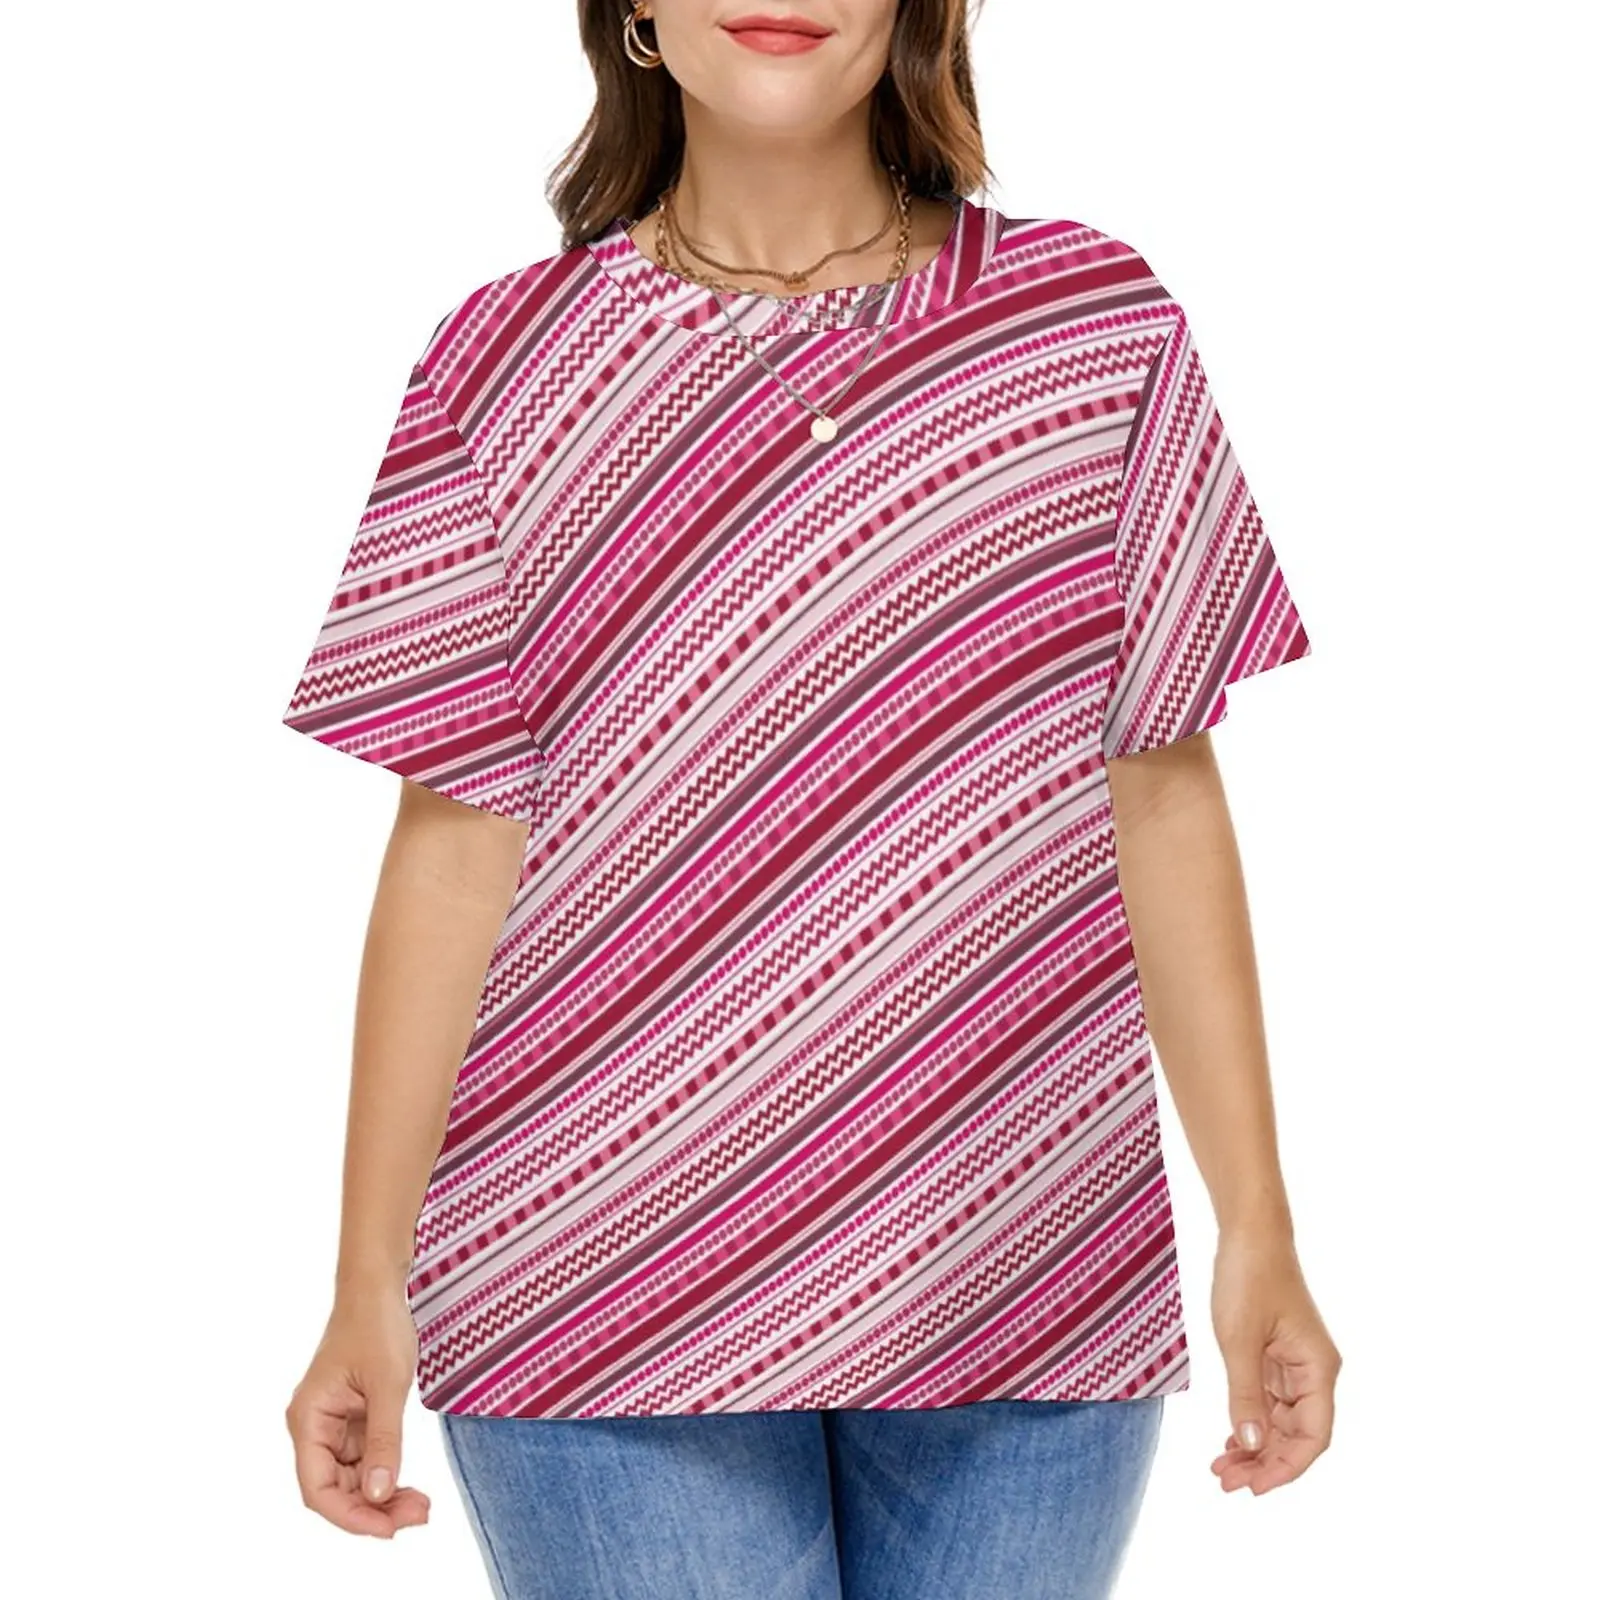 

Pink Dots And Stripes T-Shirts Funky Shades Print Street Wear T-Shirt Short-Sleeve Funny Tee Shirt Plus Size 4XL 5XL Tops Gift